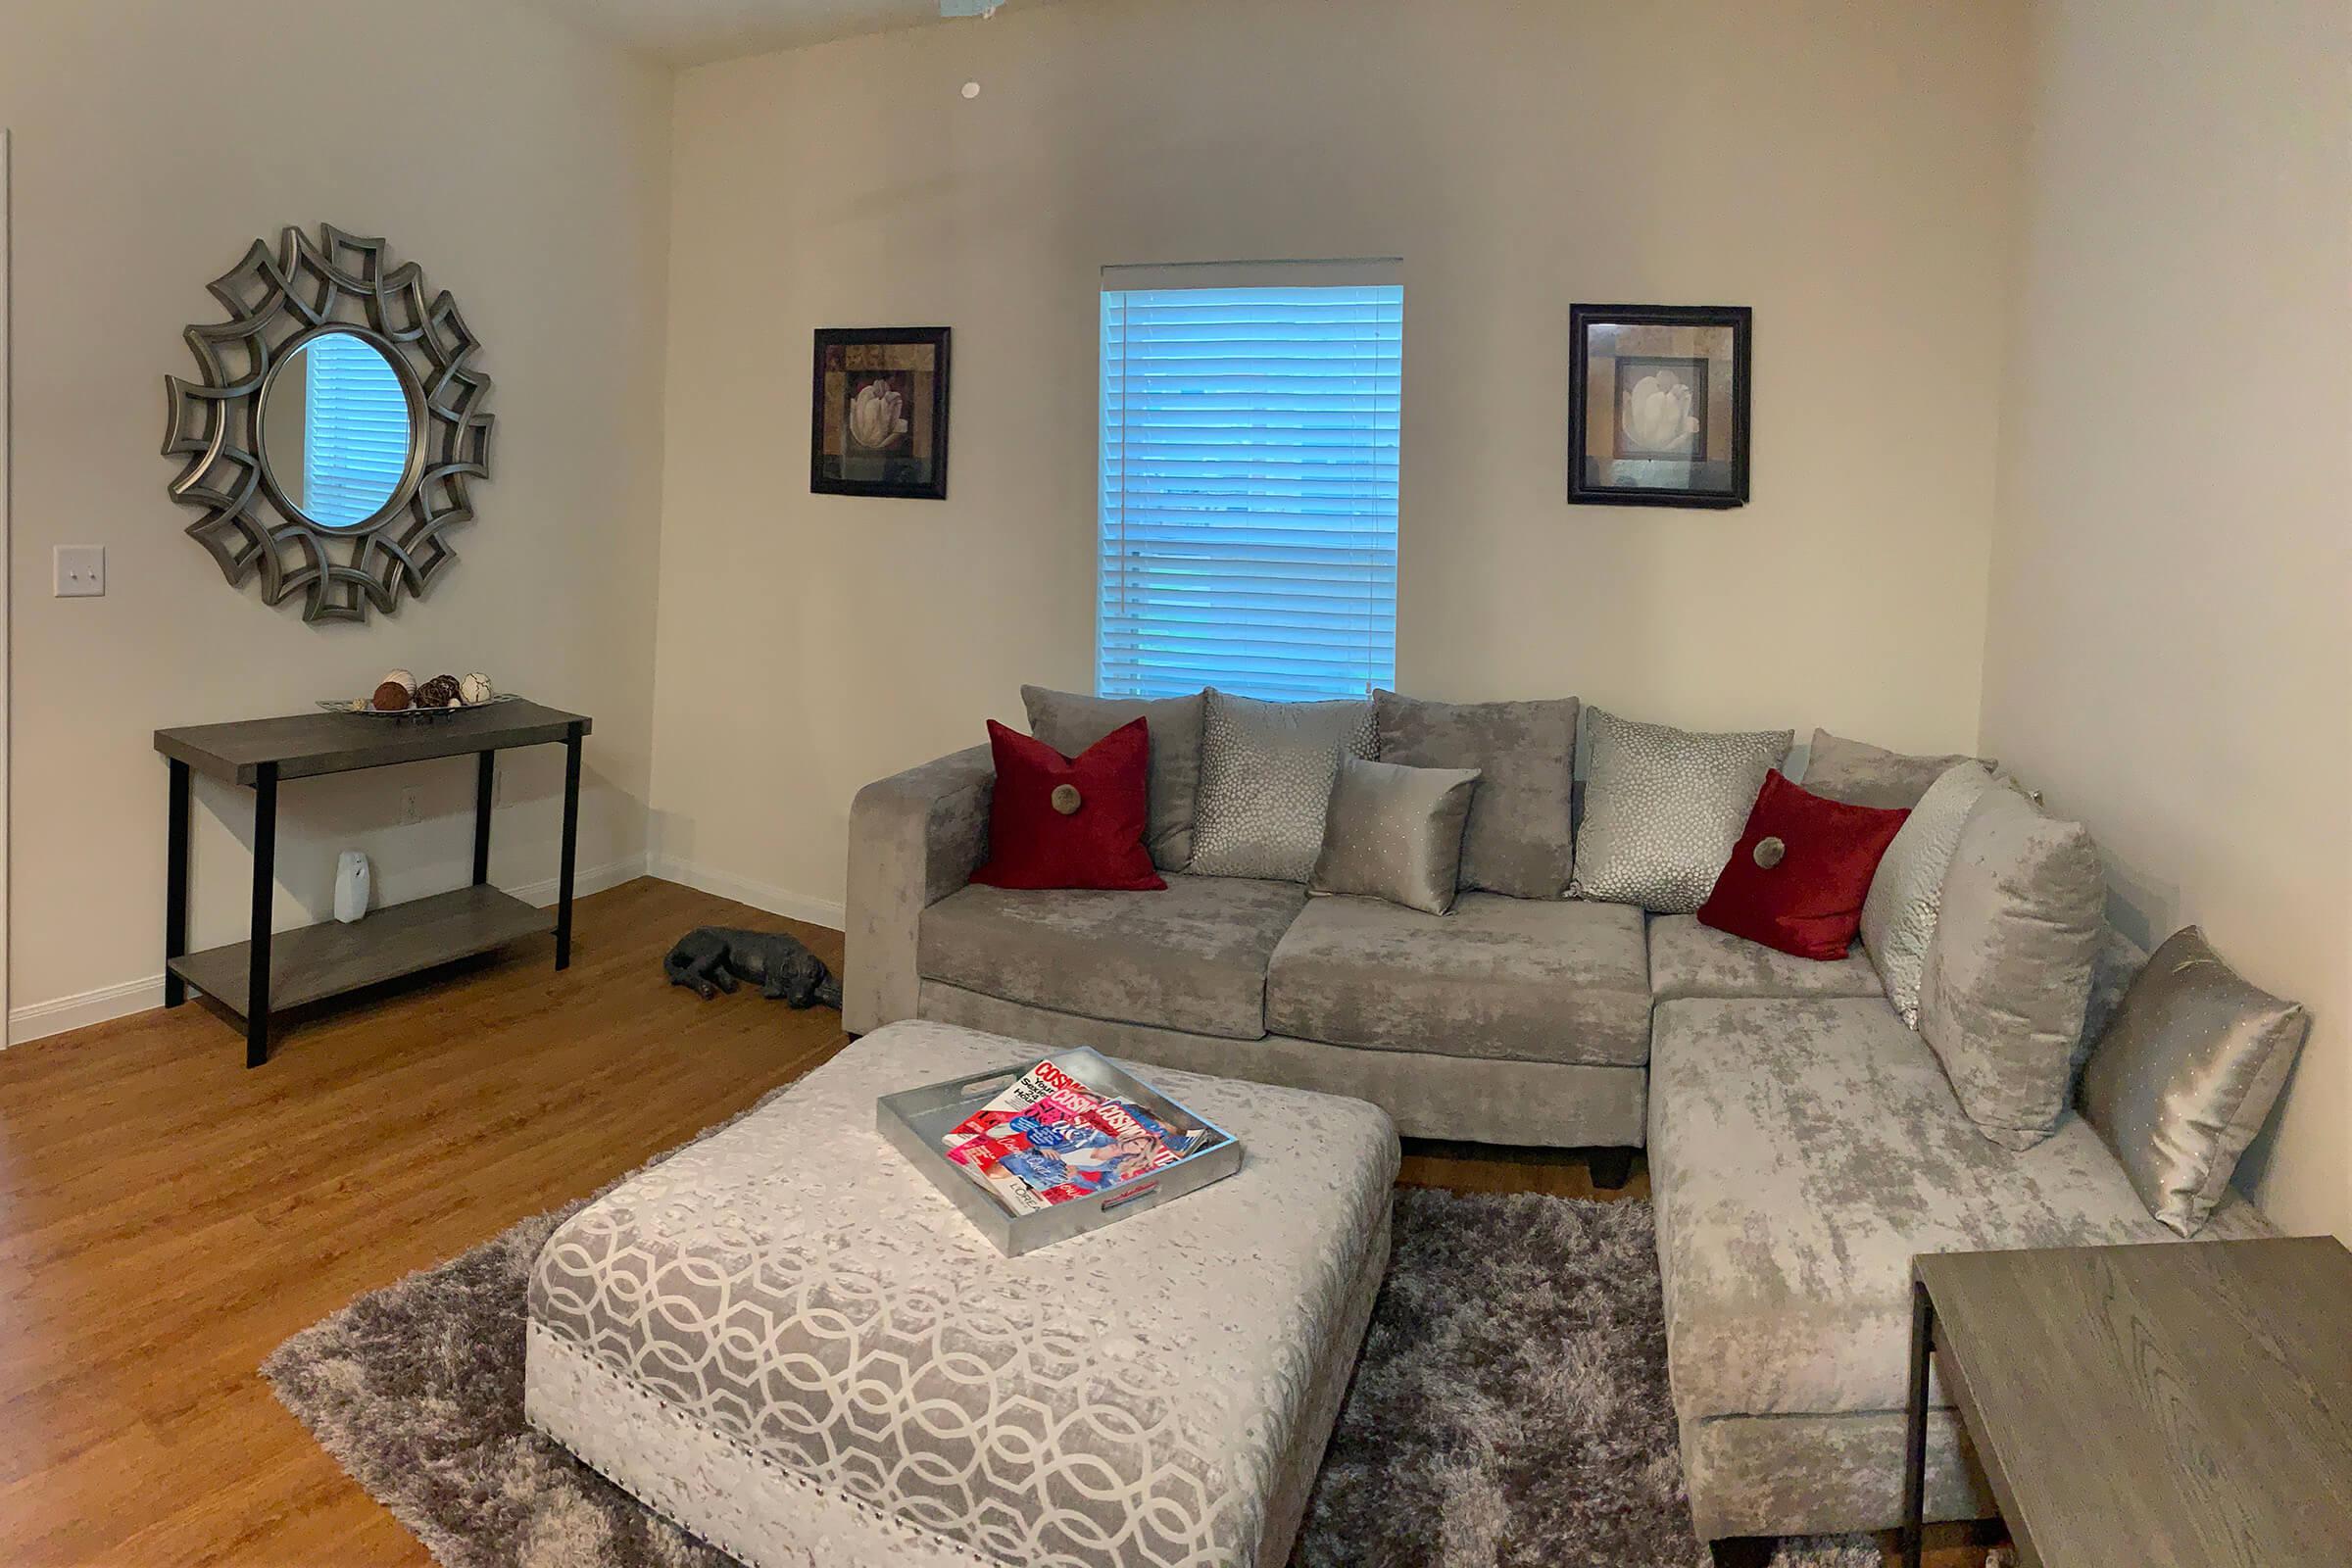 APARTMENT HOMES FOR RENT IN WESLACO, TX